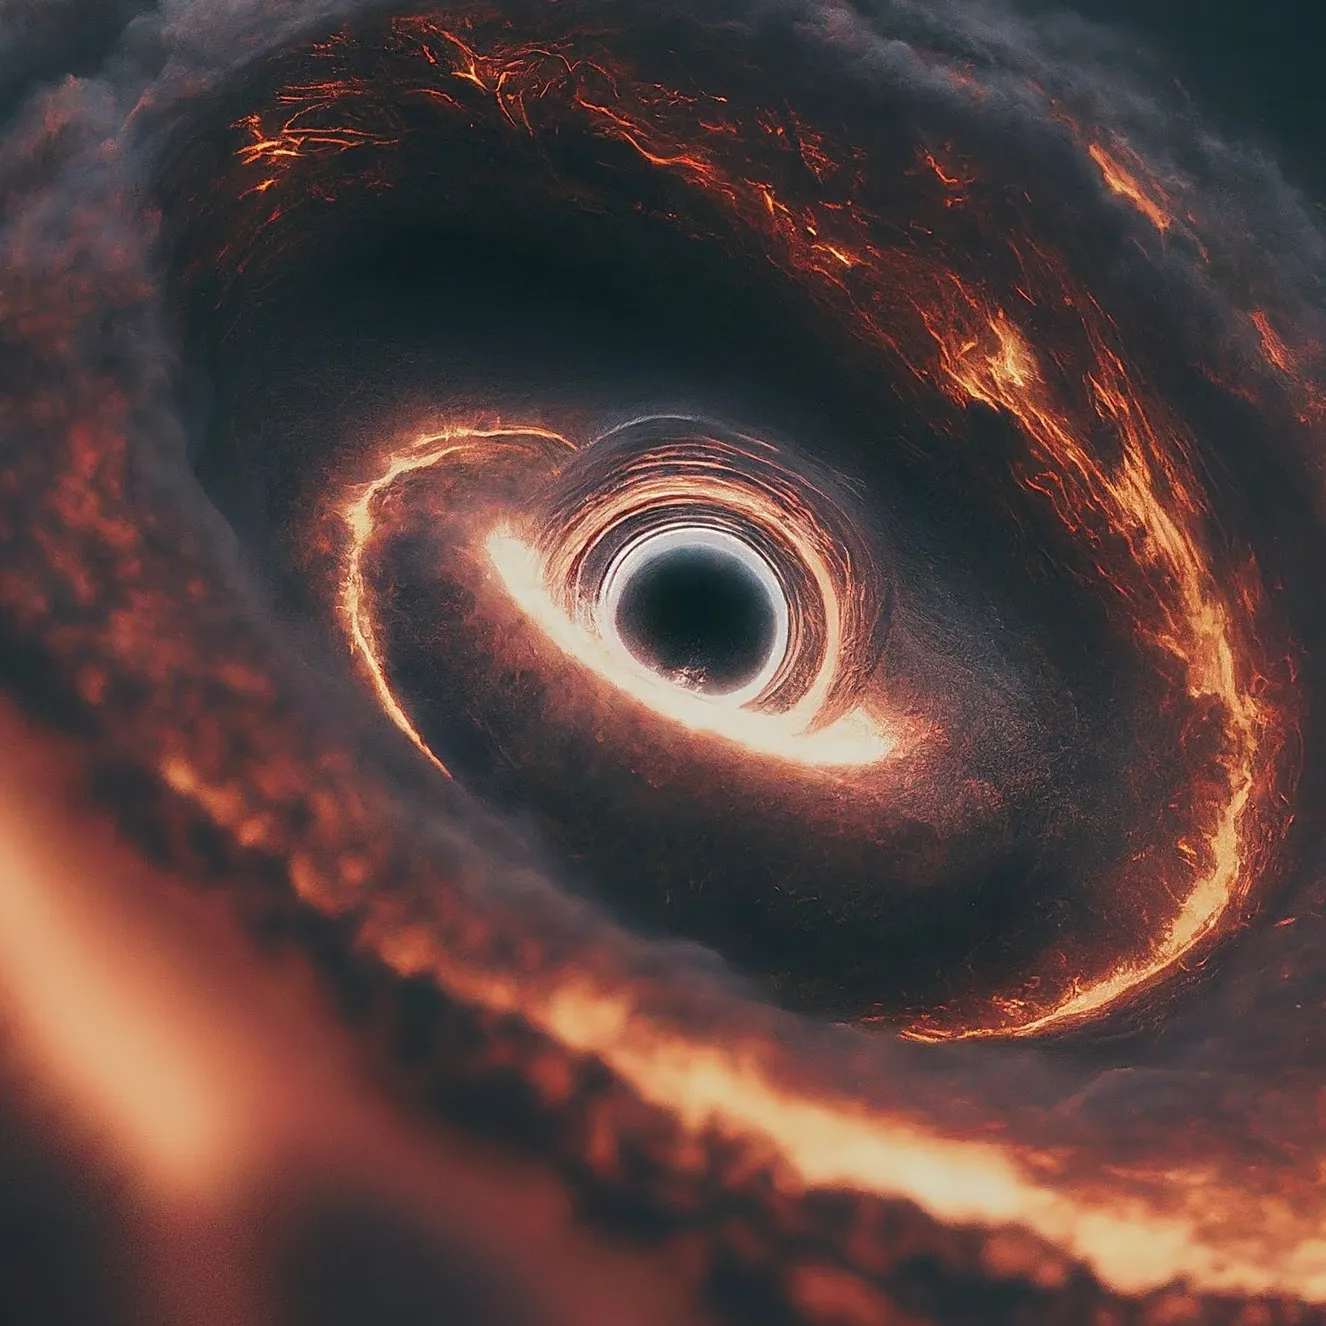 Image of a black hole generated by Google Bard.